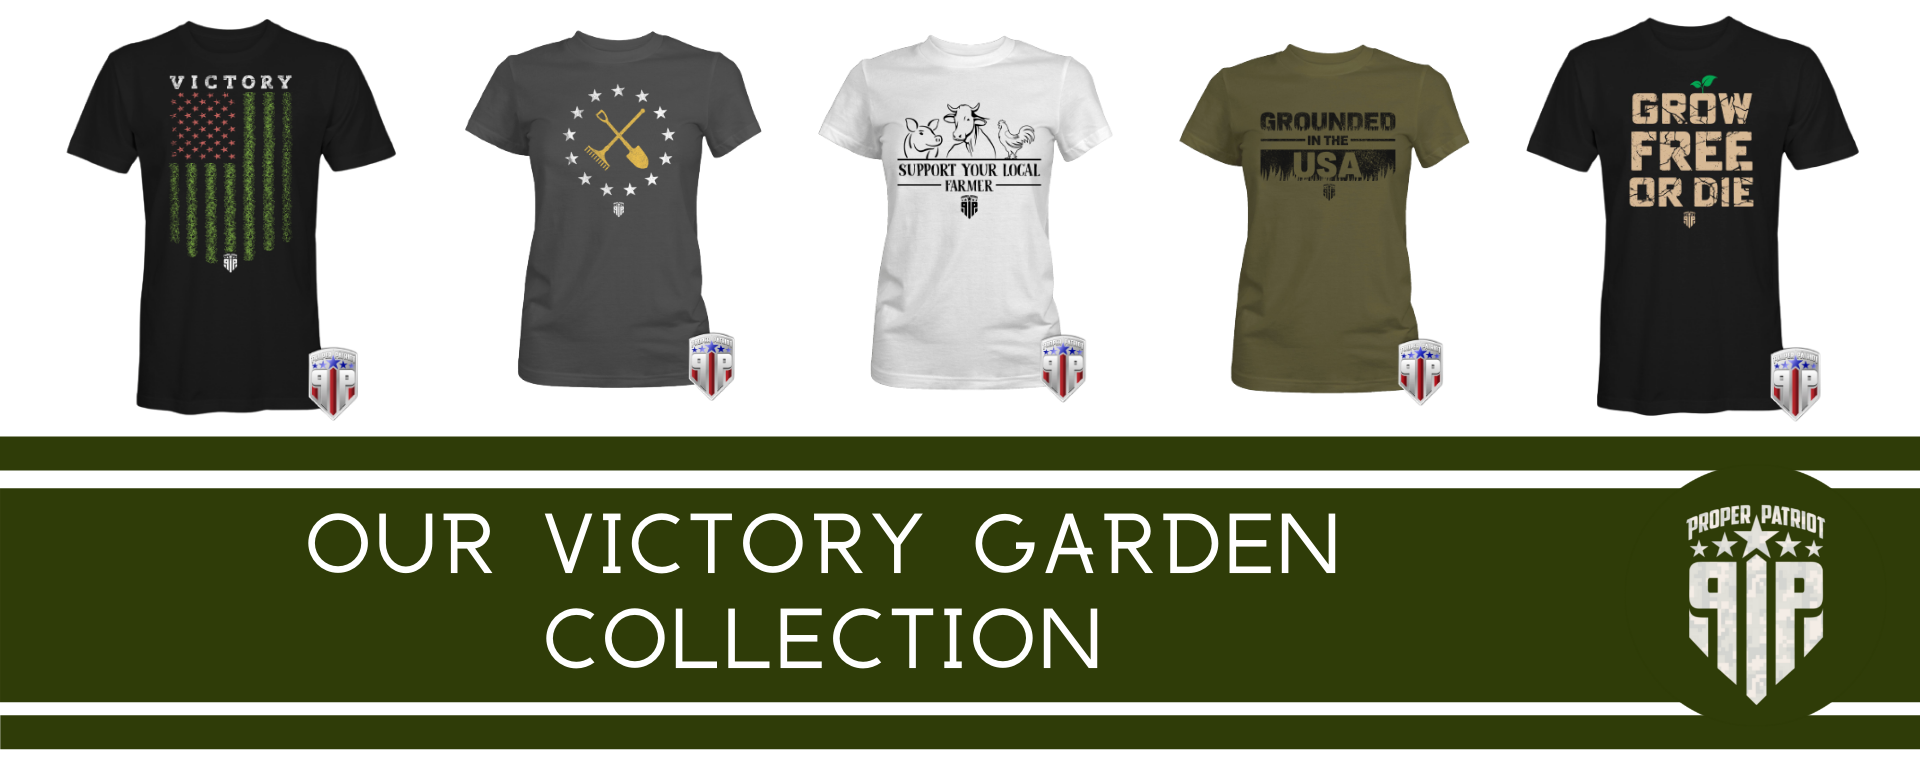 Check out our Victory Garden collection